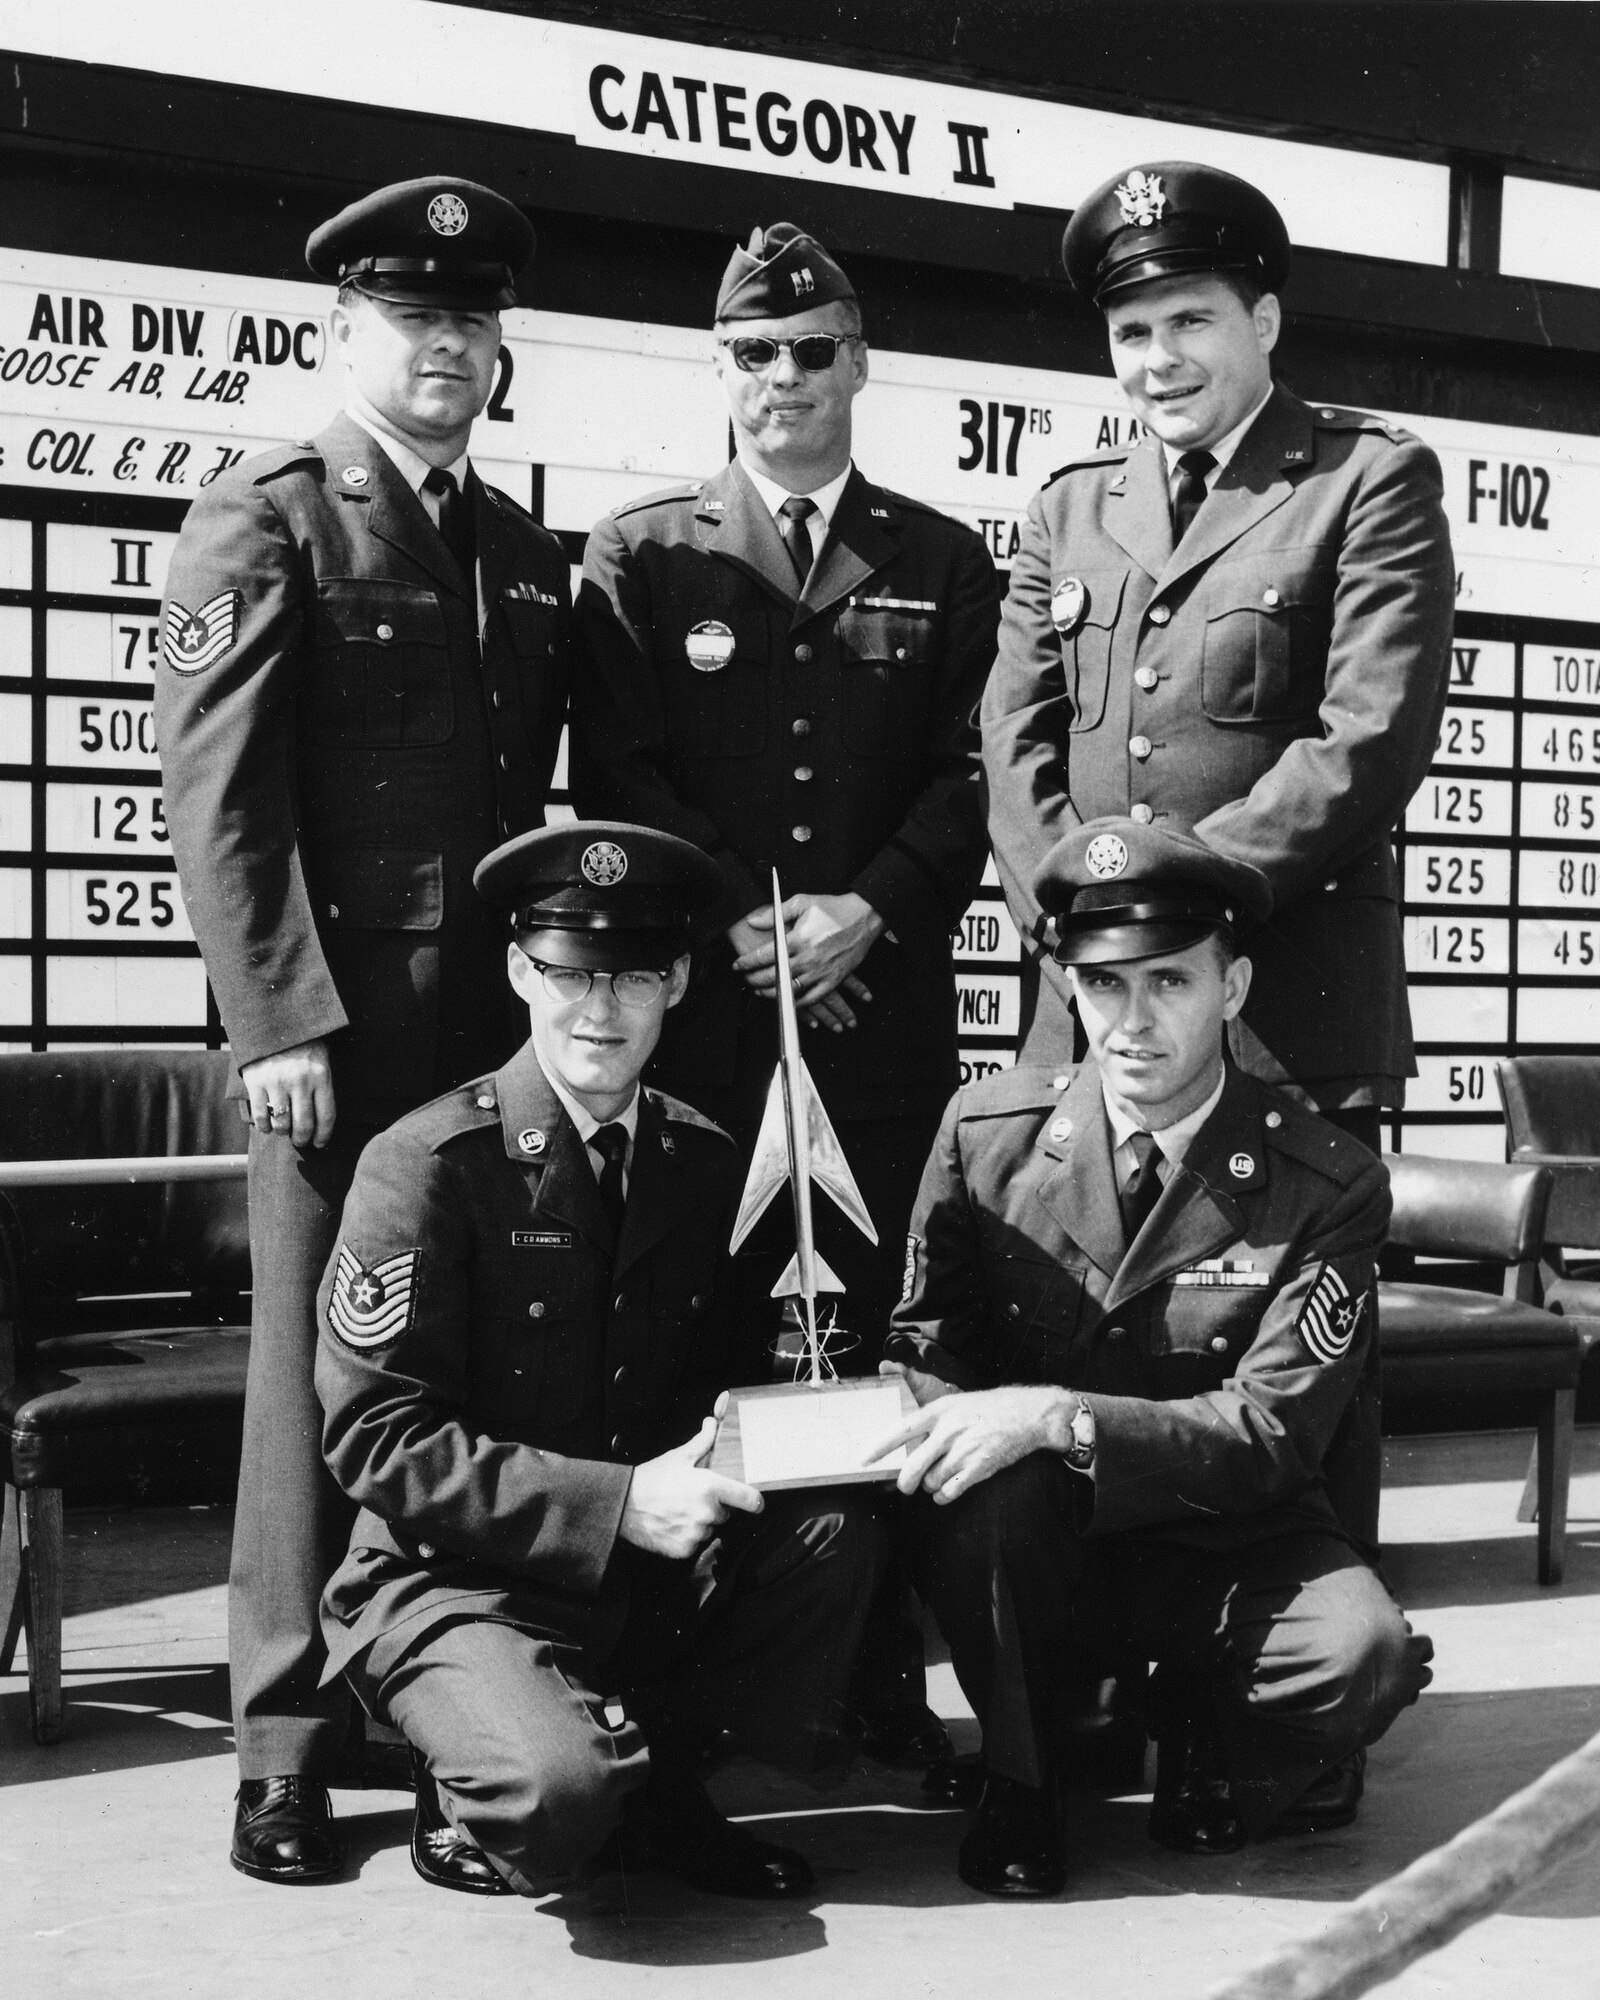 TYNDALL AIR FORCE BASE, Fla. - Capt. Edmund Morrisey, top center, pictured here in 1963 with personnel from the Pennsylvania Air National Guard's 146th Fighter Interceptor Squadron and members of the Colorado and Utah Air National Guard who were among the first Air National Guard teams to win the Air Force's William Tell aerial gunnery competition. (U.S. Air Force file photo/Released)